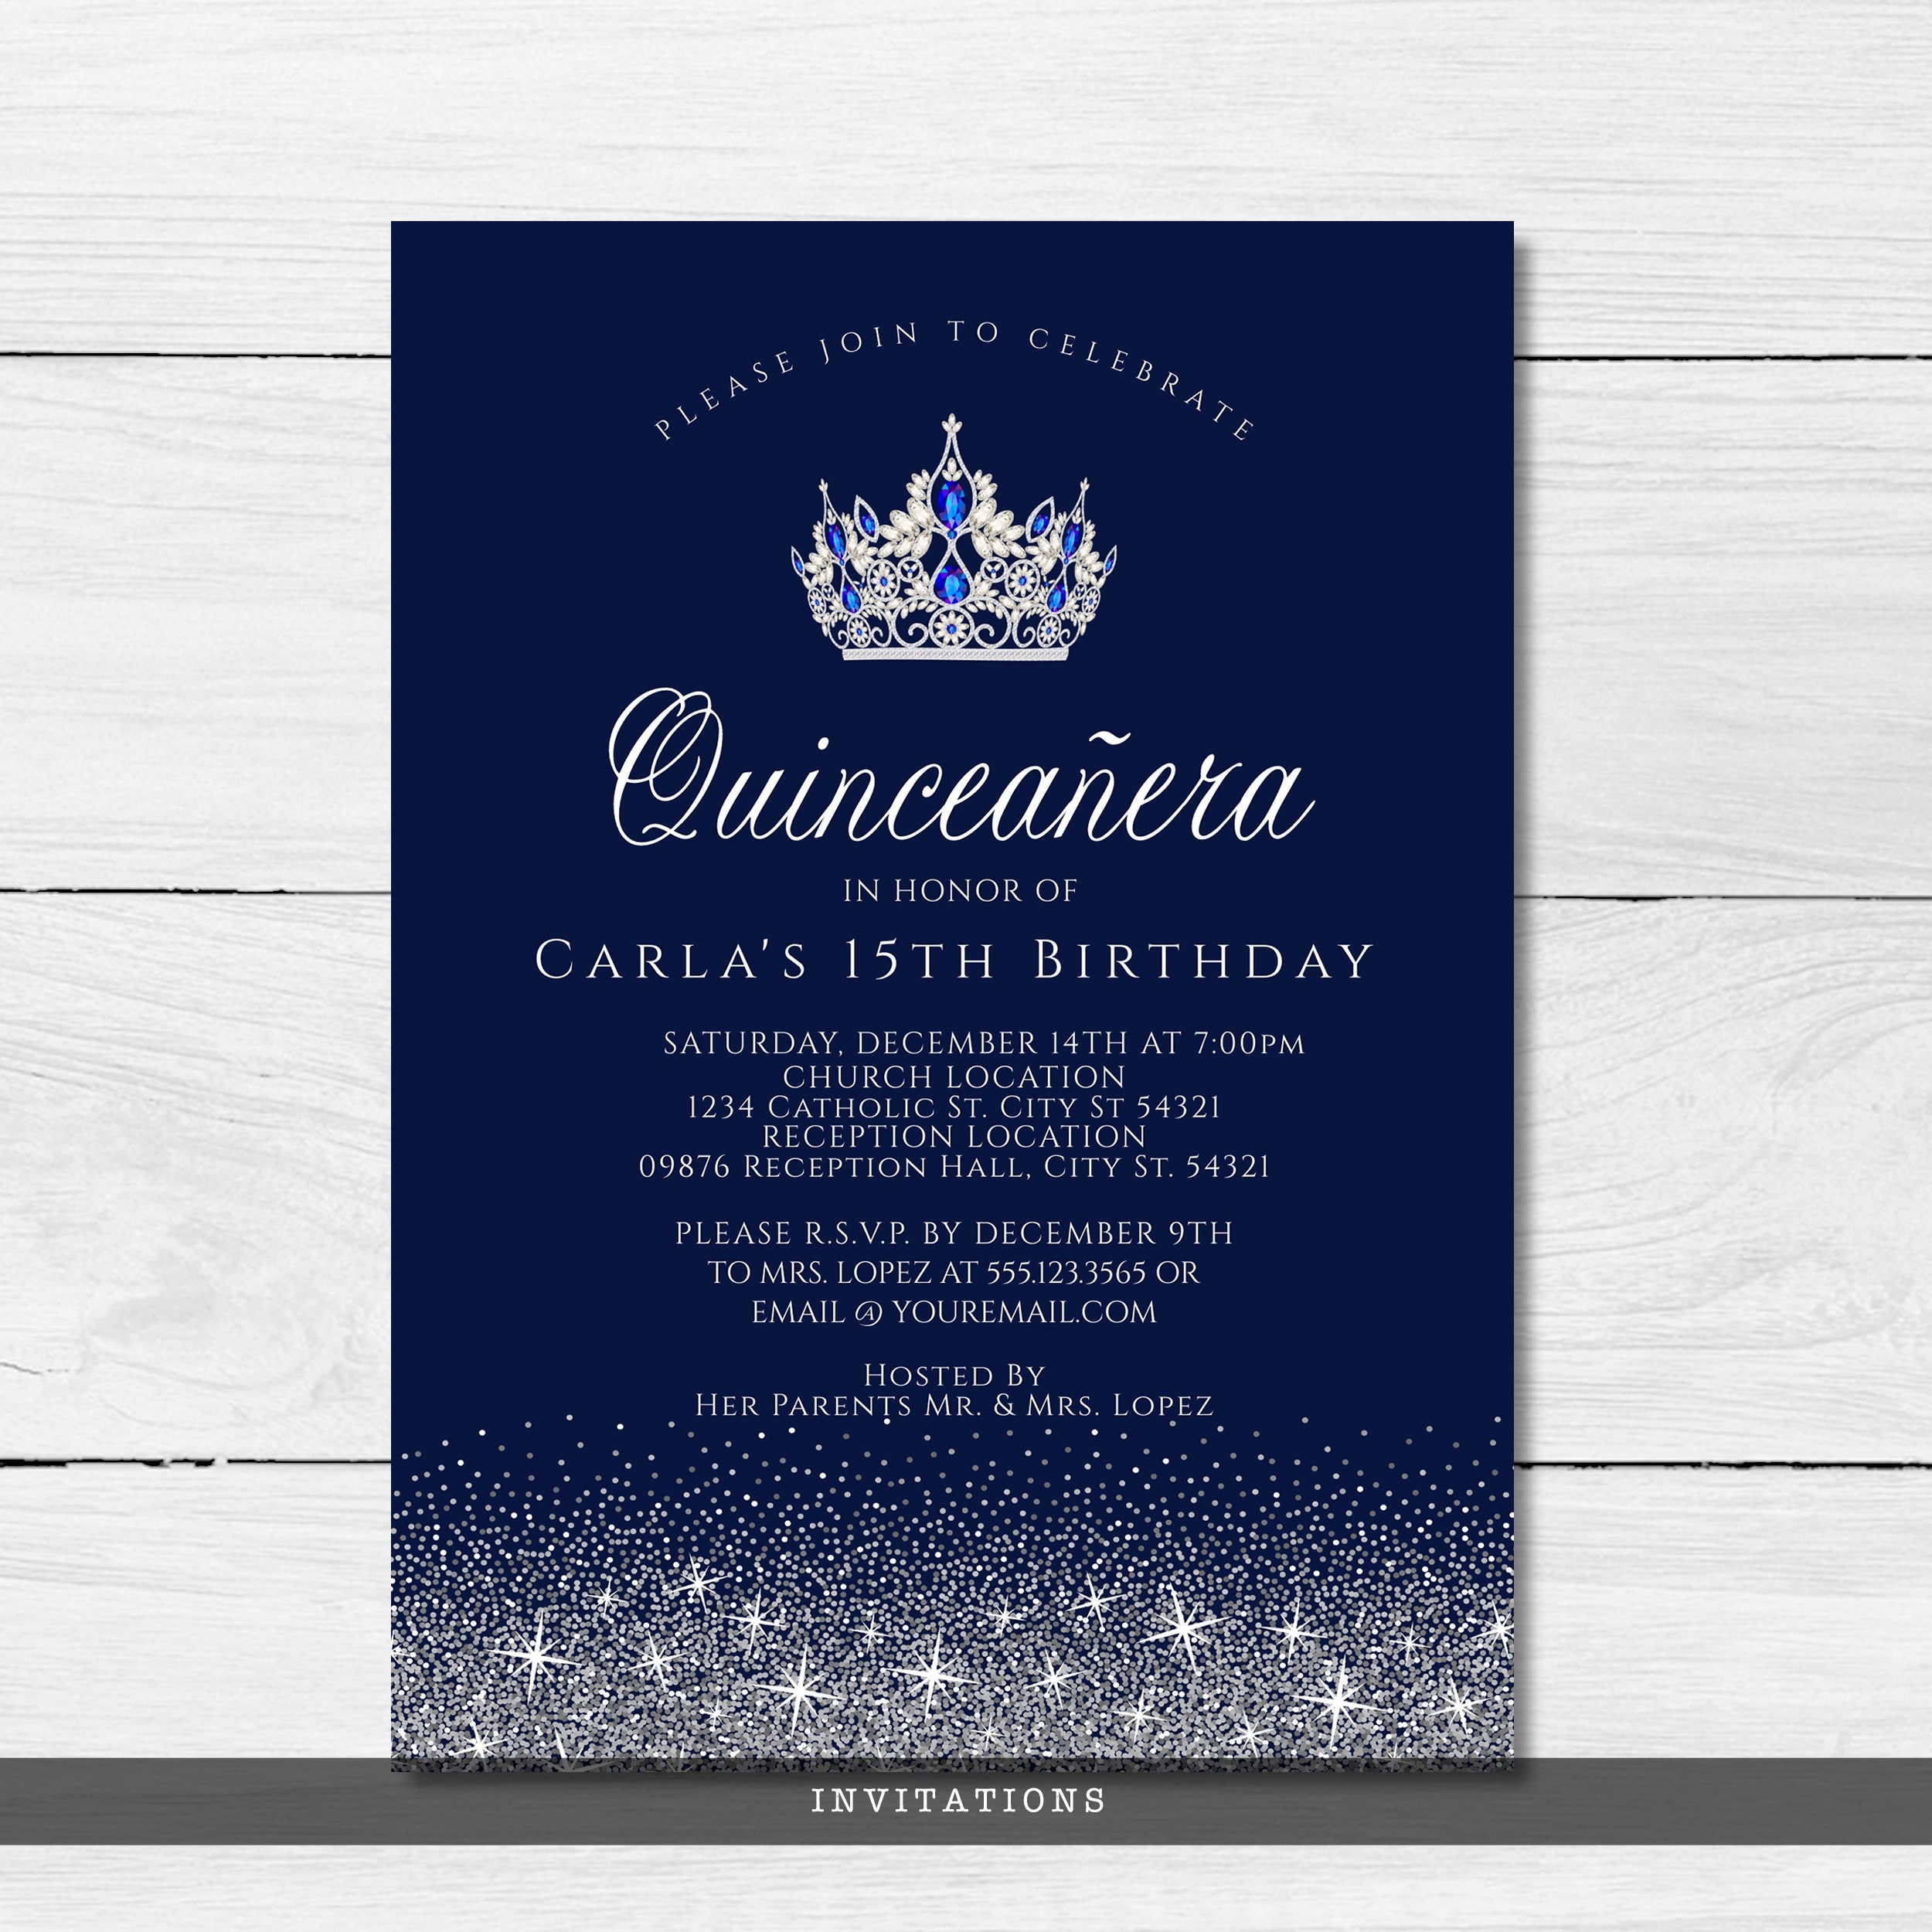 Quinceanera Invitations, Silver and Blue Glitter Quinceanera Invitations,  Sapphire Blue Quinceanera Invitation, Printable Quince Invitations 